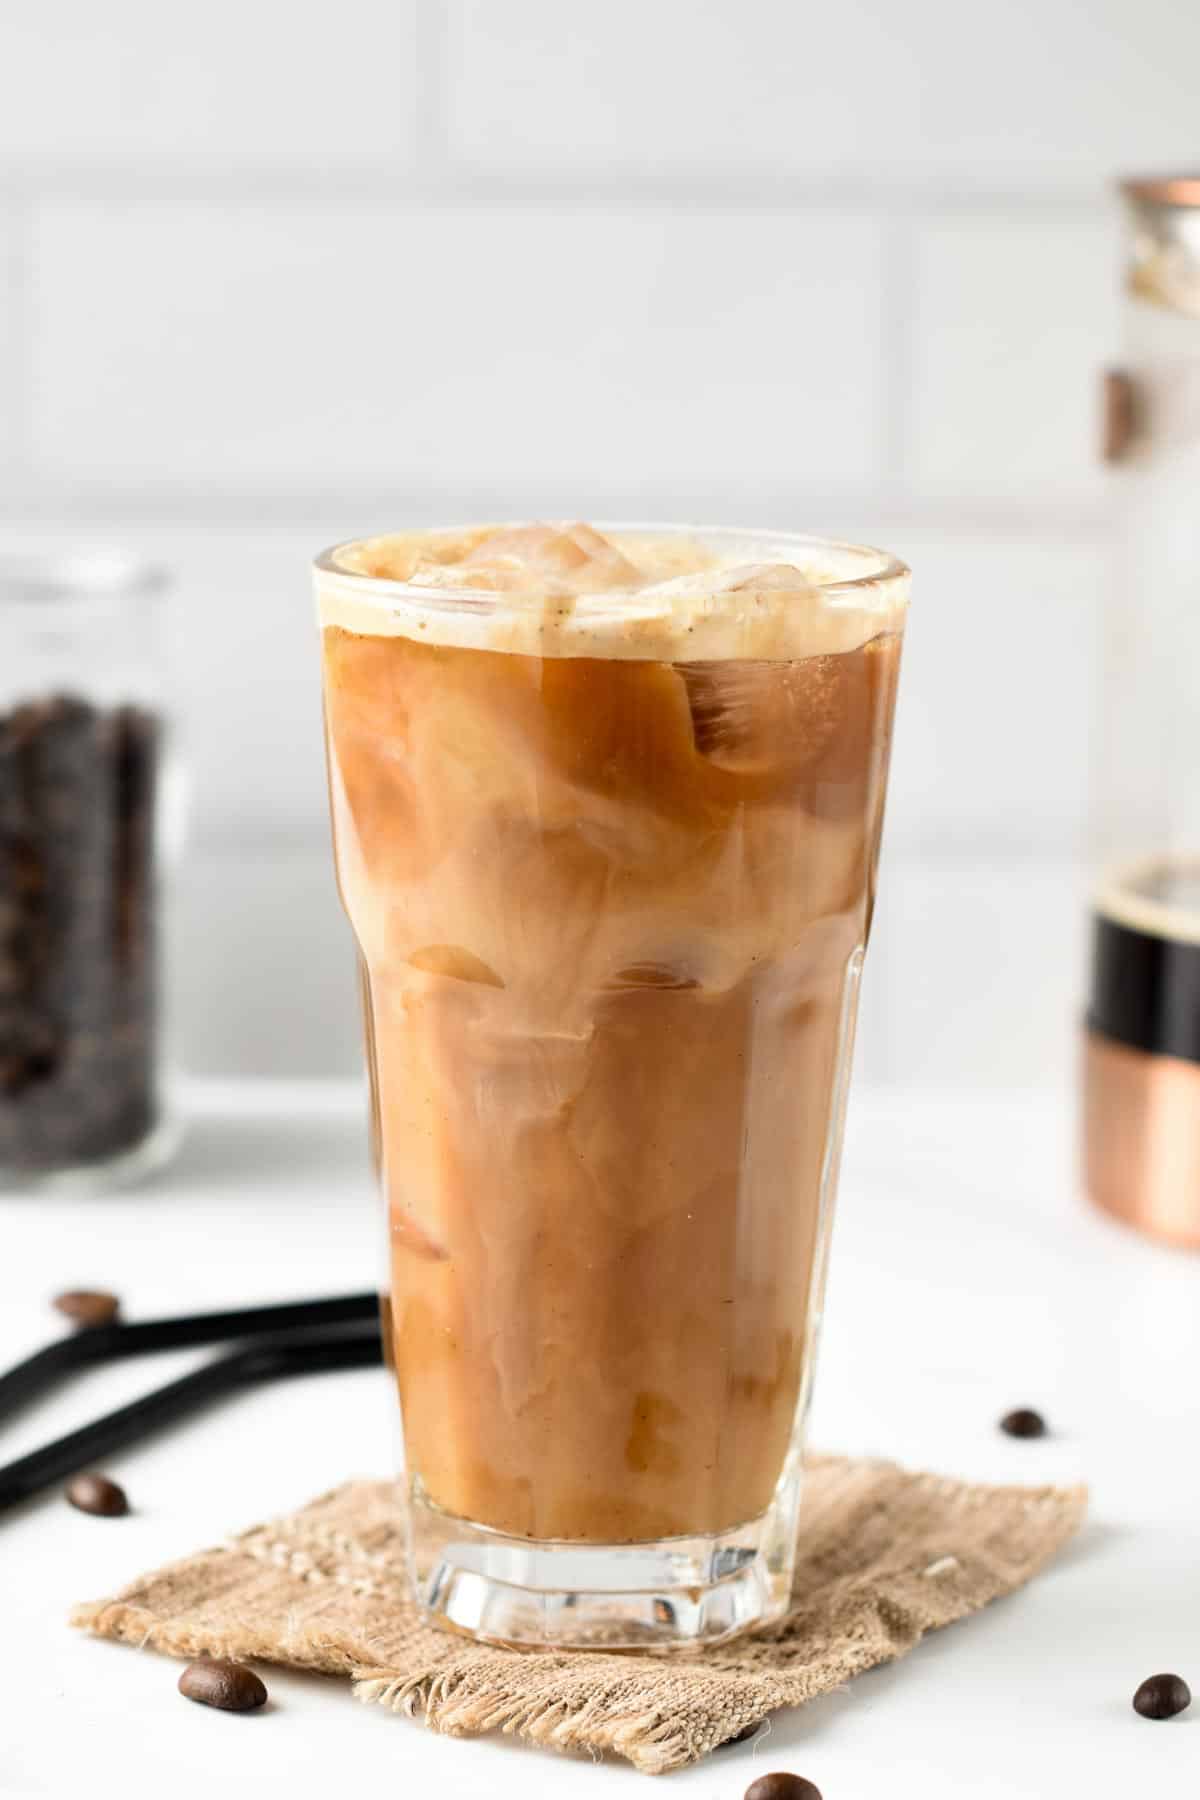 Best Way to Make Iced Coffee at Home: 2 Easy Recipes